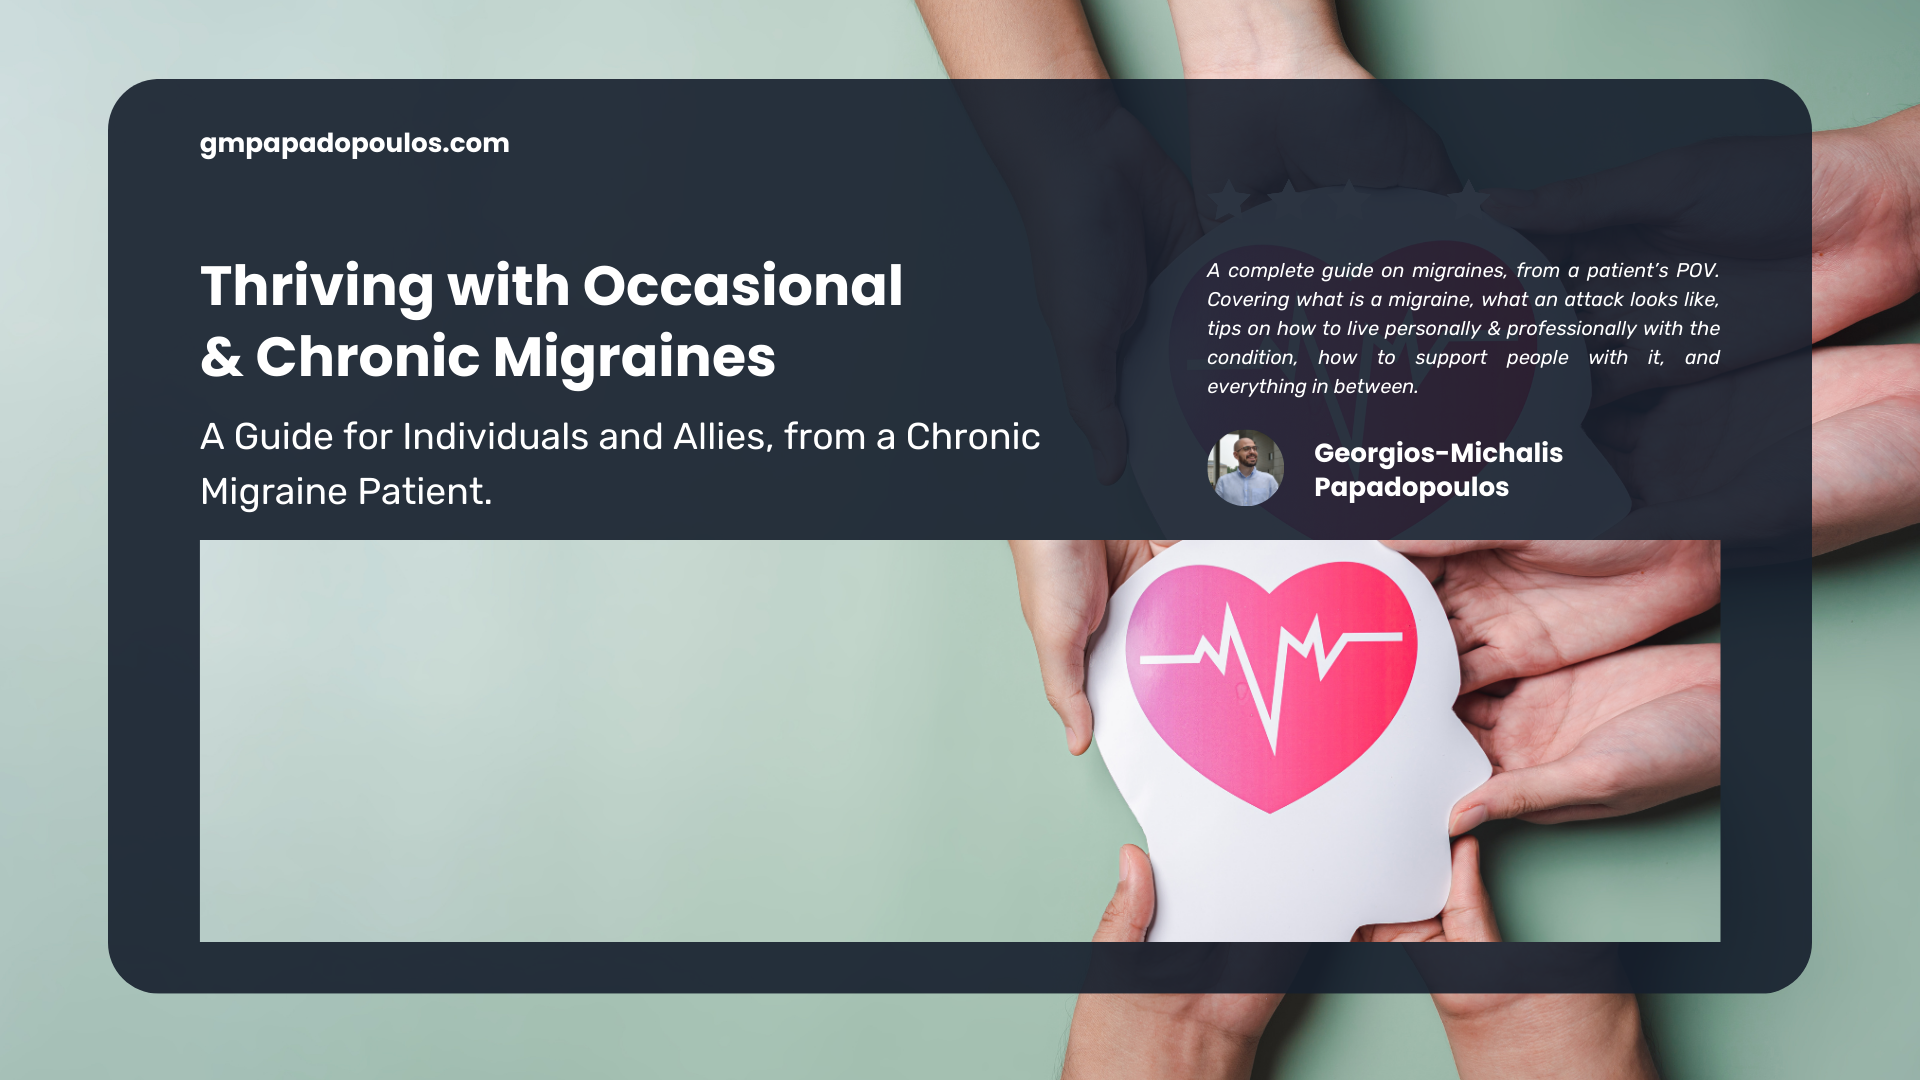 A complete guide on migraines, from a patient’s POV. Covering what is a migraine, what an attack looks like, tips on how to live personally & professionally with the condition, how to support people with it, and everything in between.